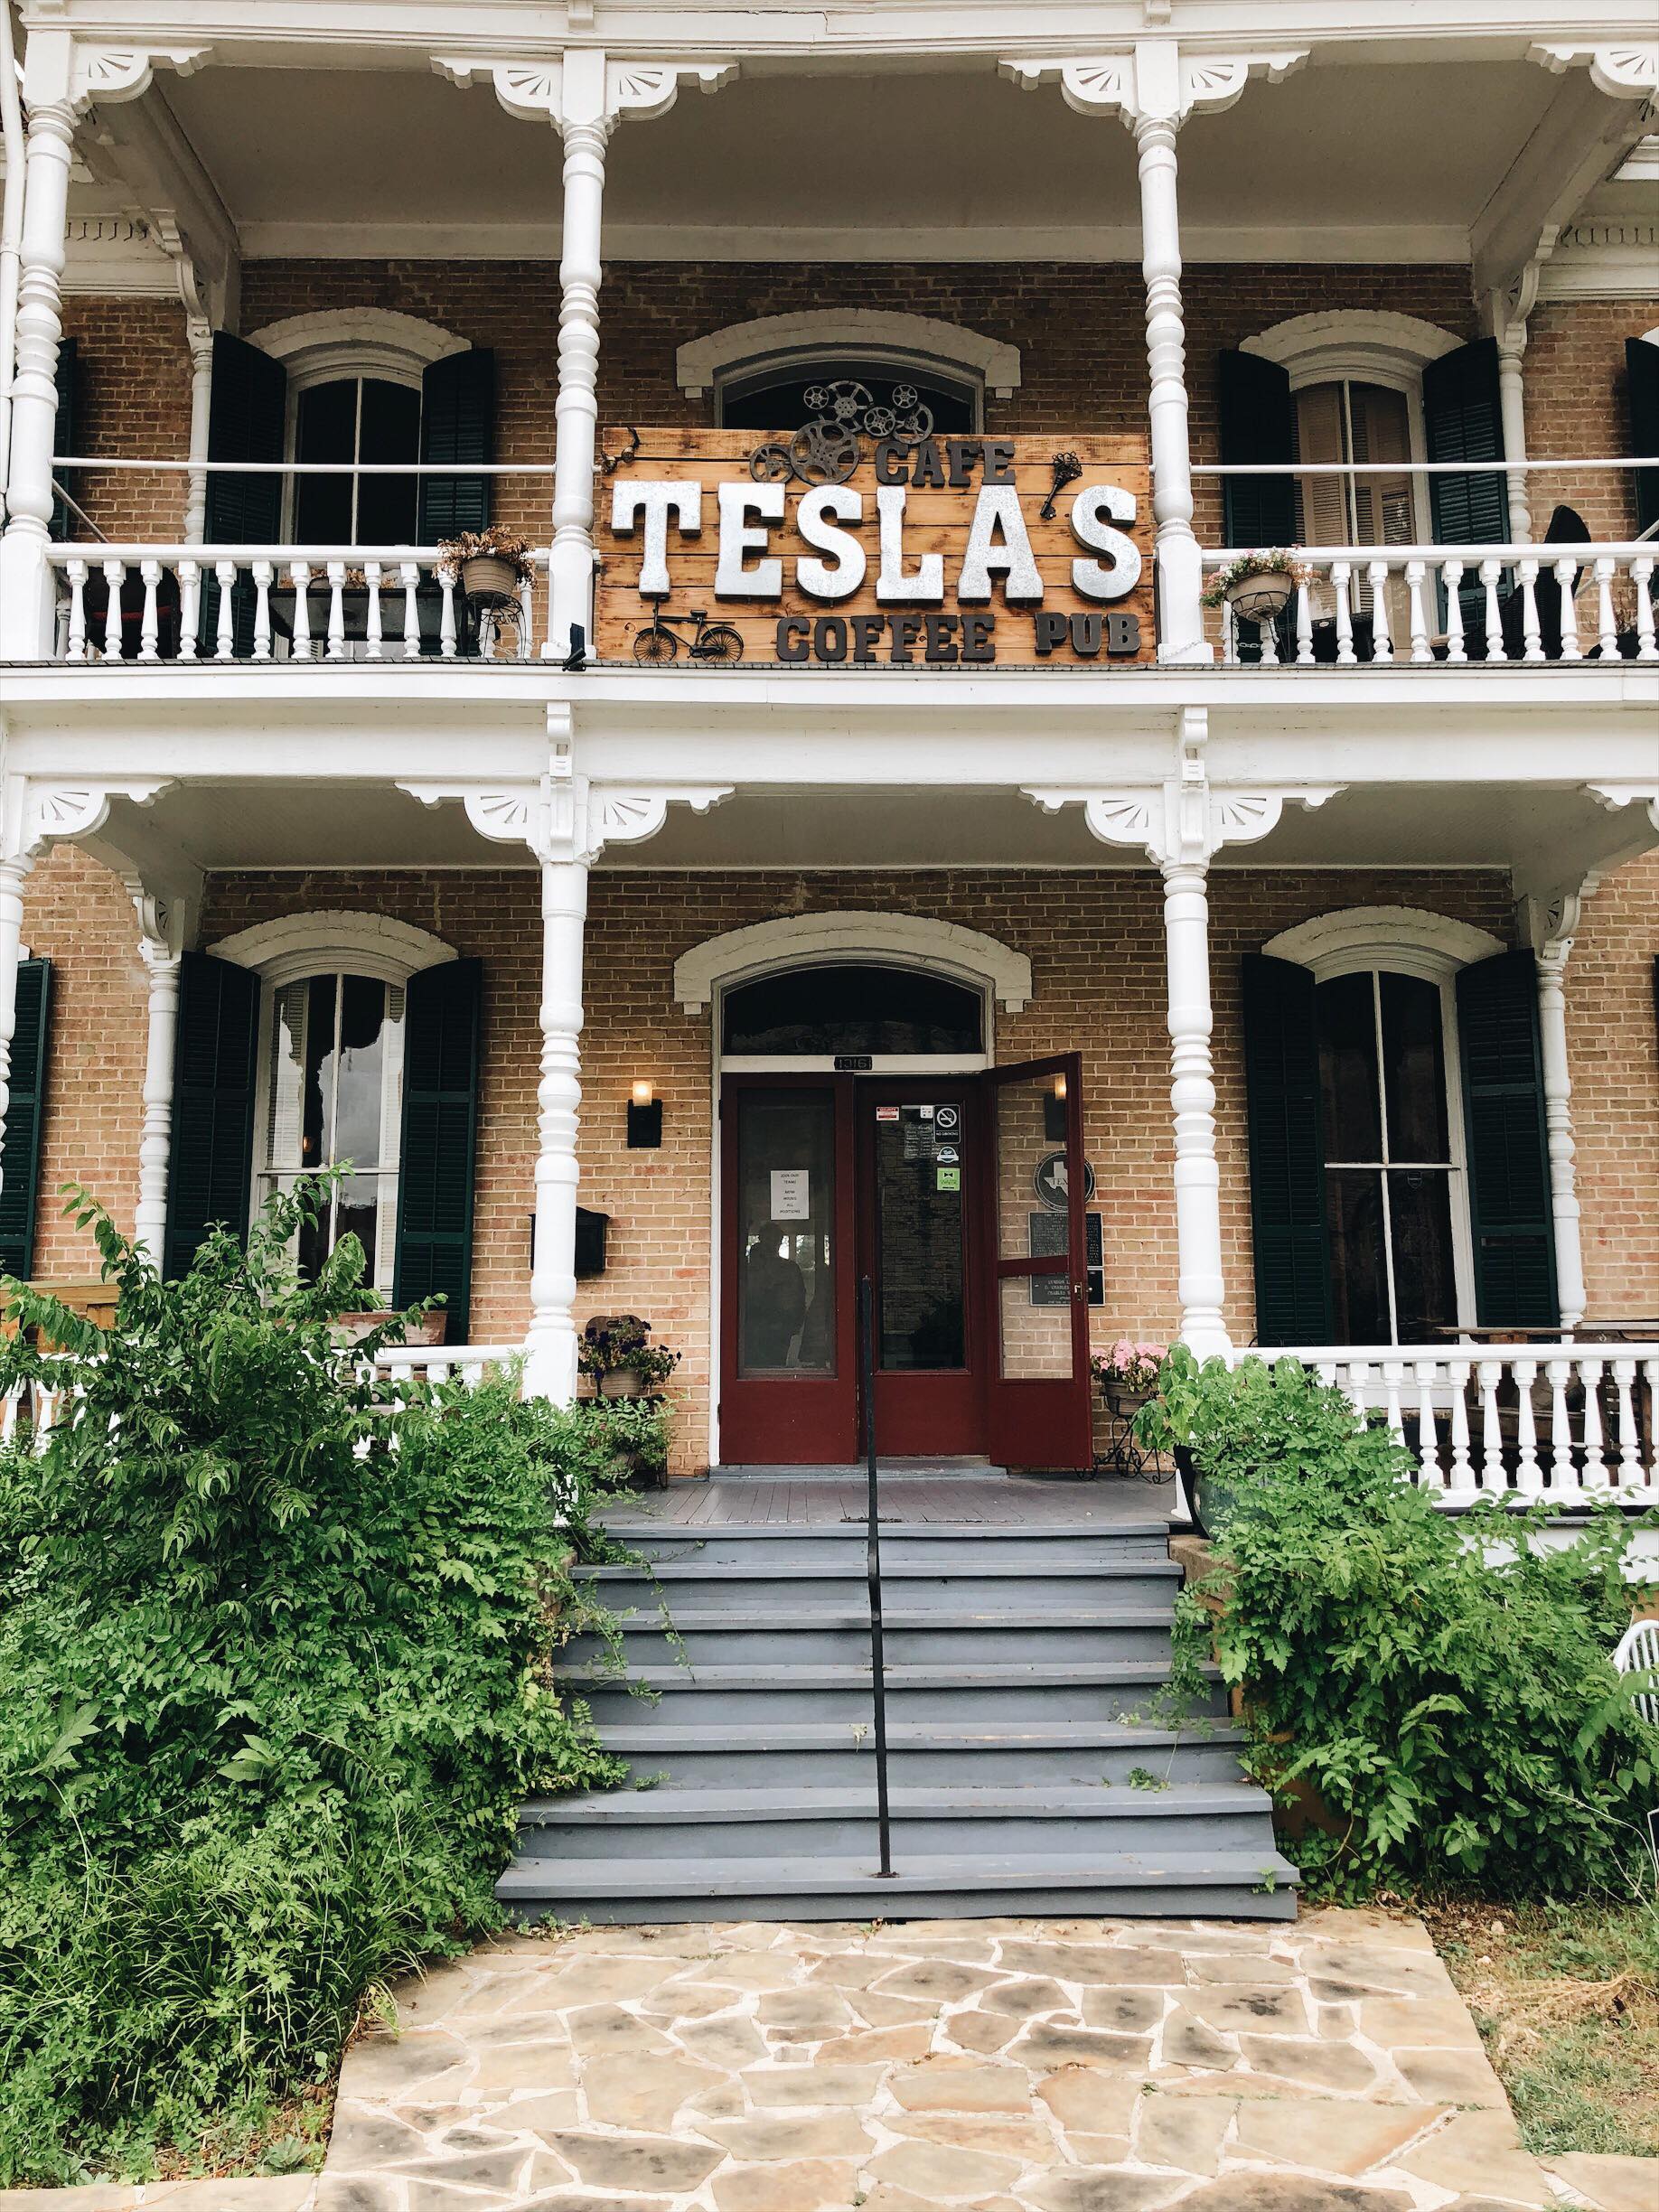 Brunch at Teslas Cafe and Coffee Pub in Waco